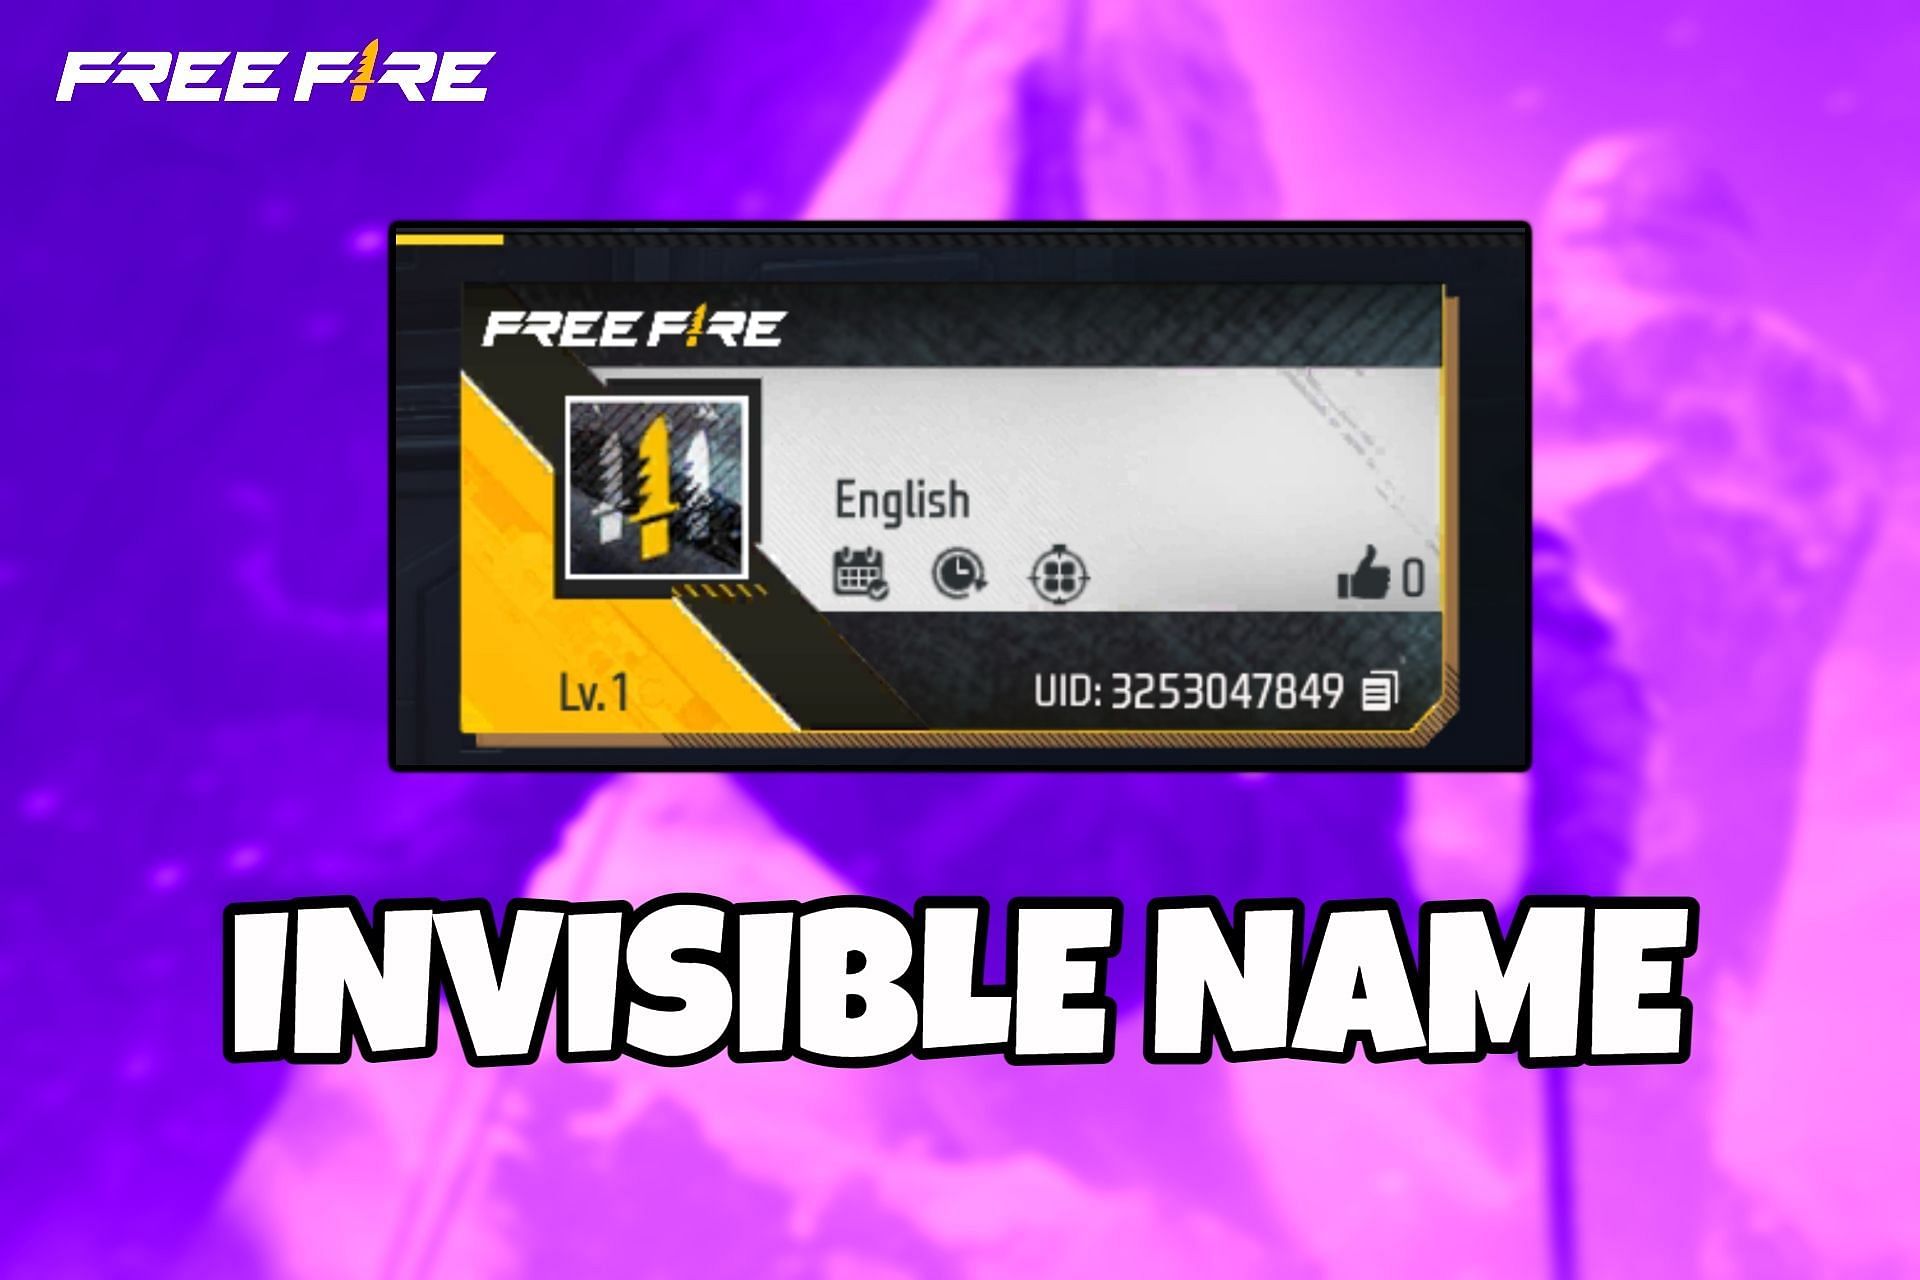 Users can get invisible name in Free Fire by using Unicode 3164 (Image via Sportskeeda)